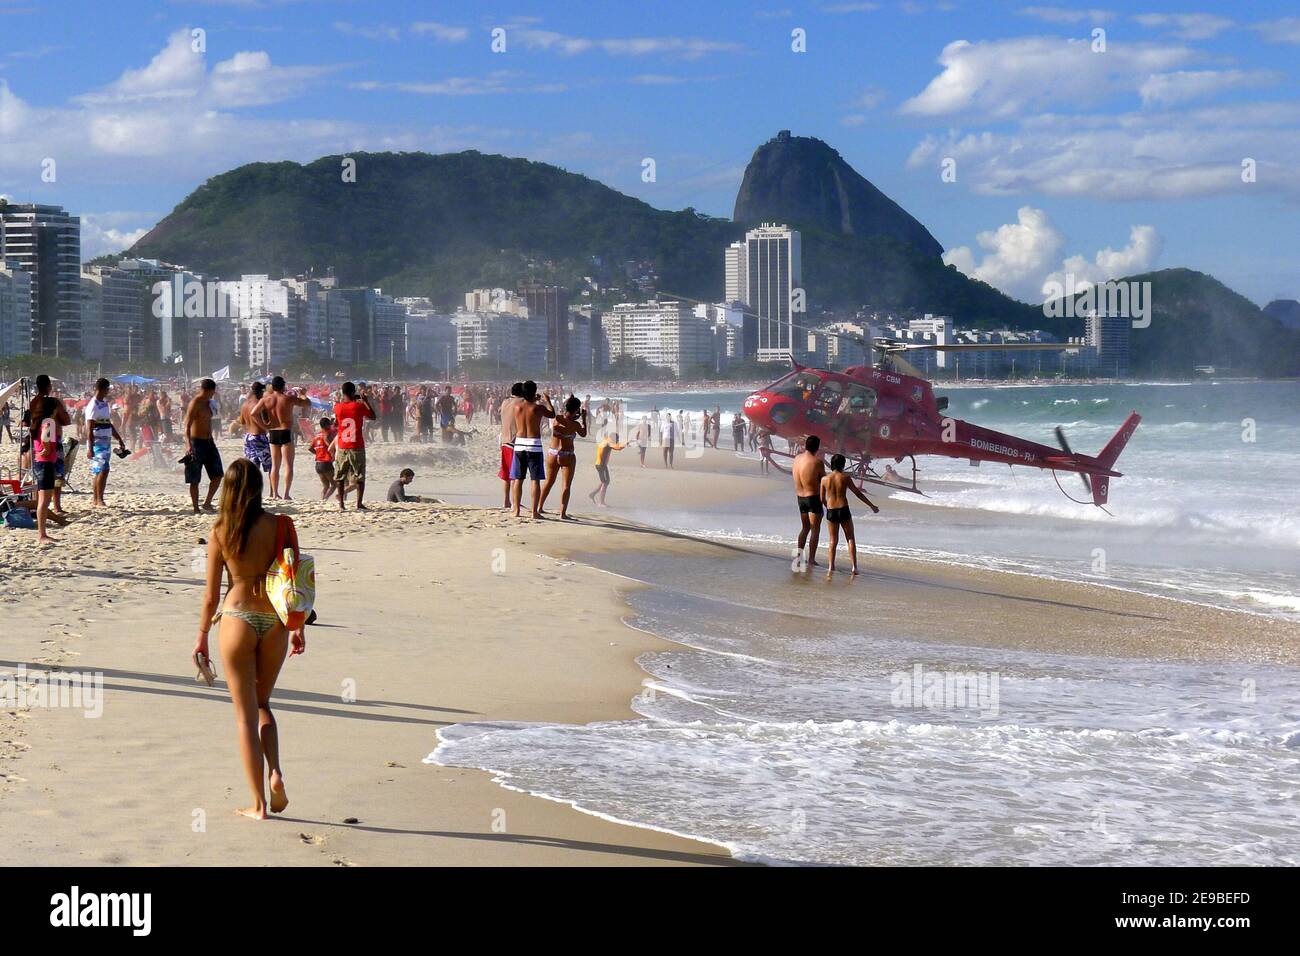 A helicopter lands on Copacabana Beach at Rio de Janeiro in Brazil after rescuing a person from the Atlantic Ocean surf. Stock Photo